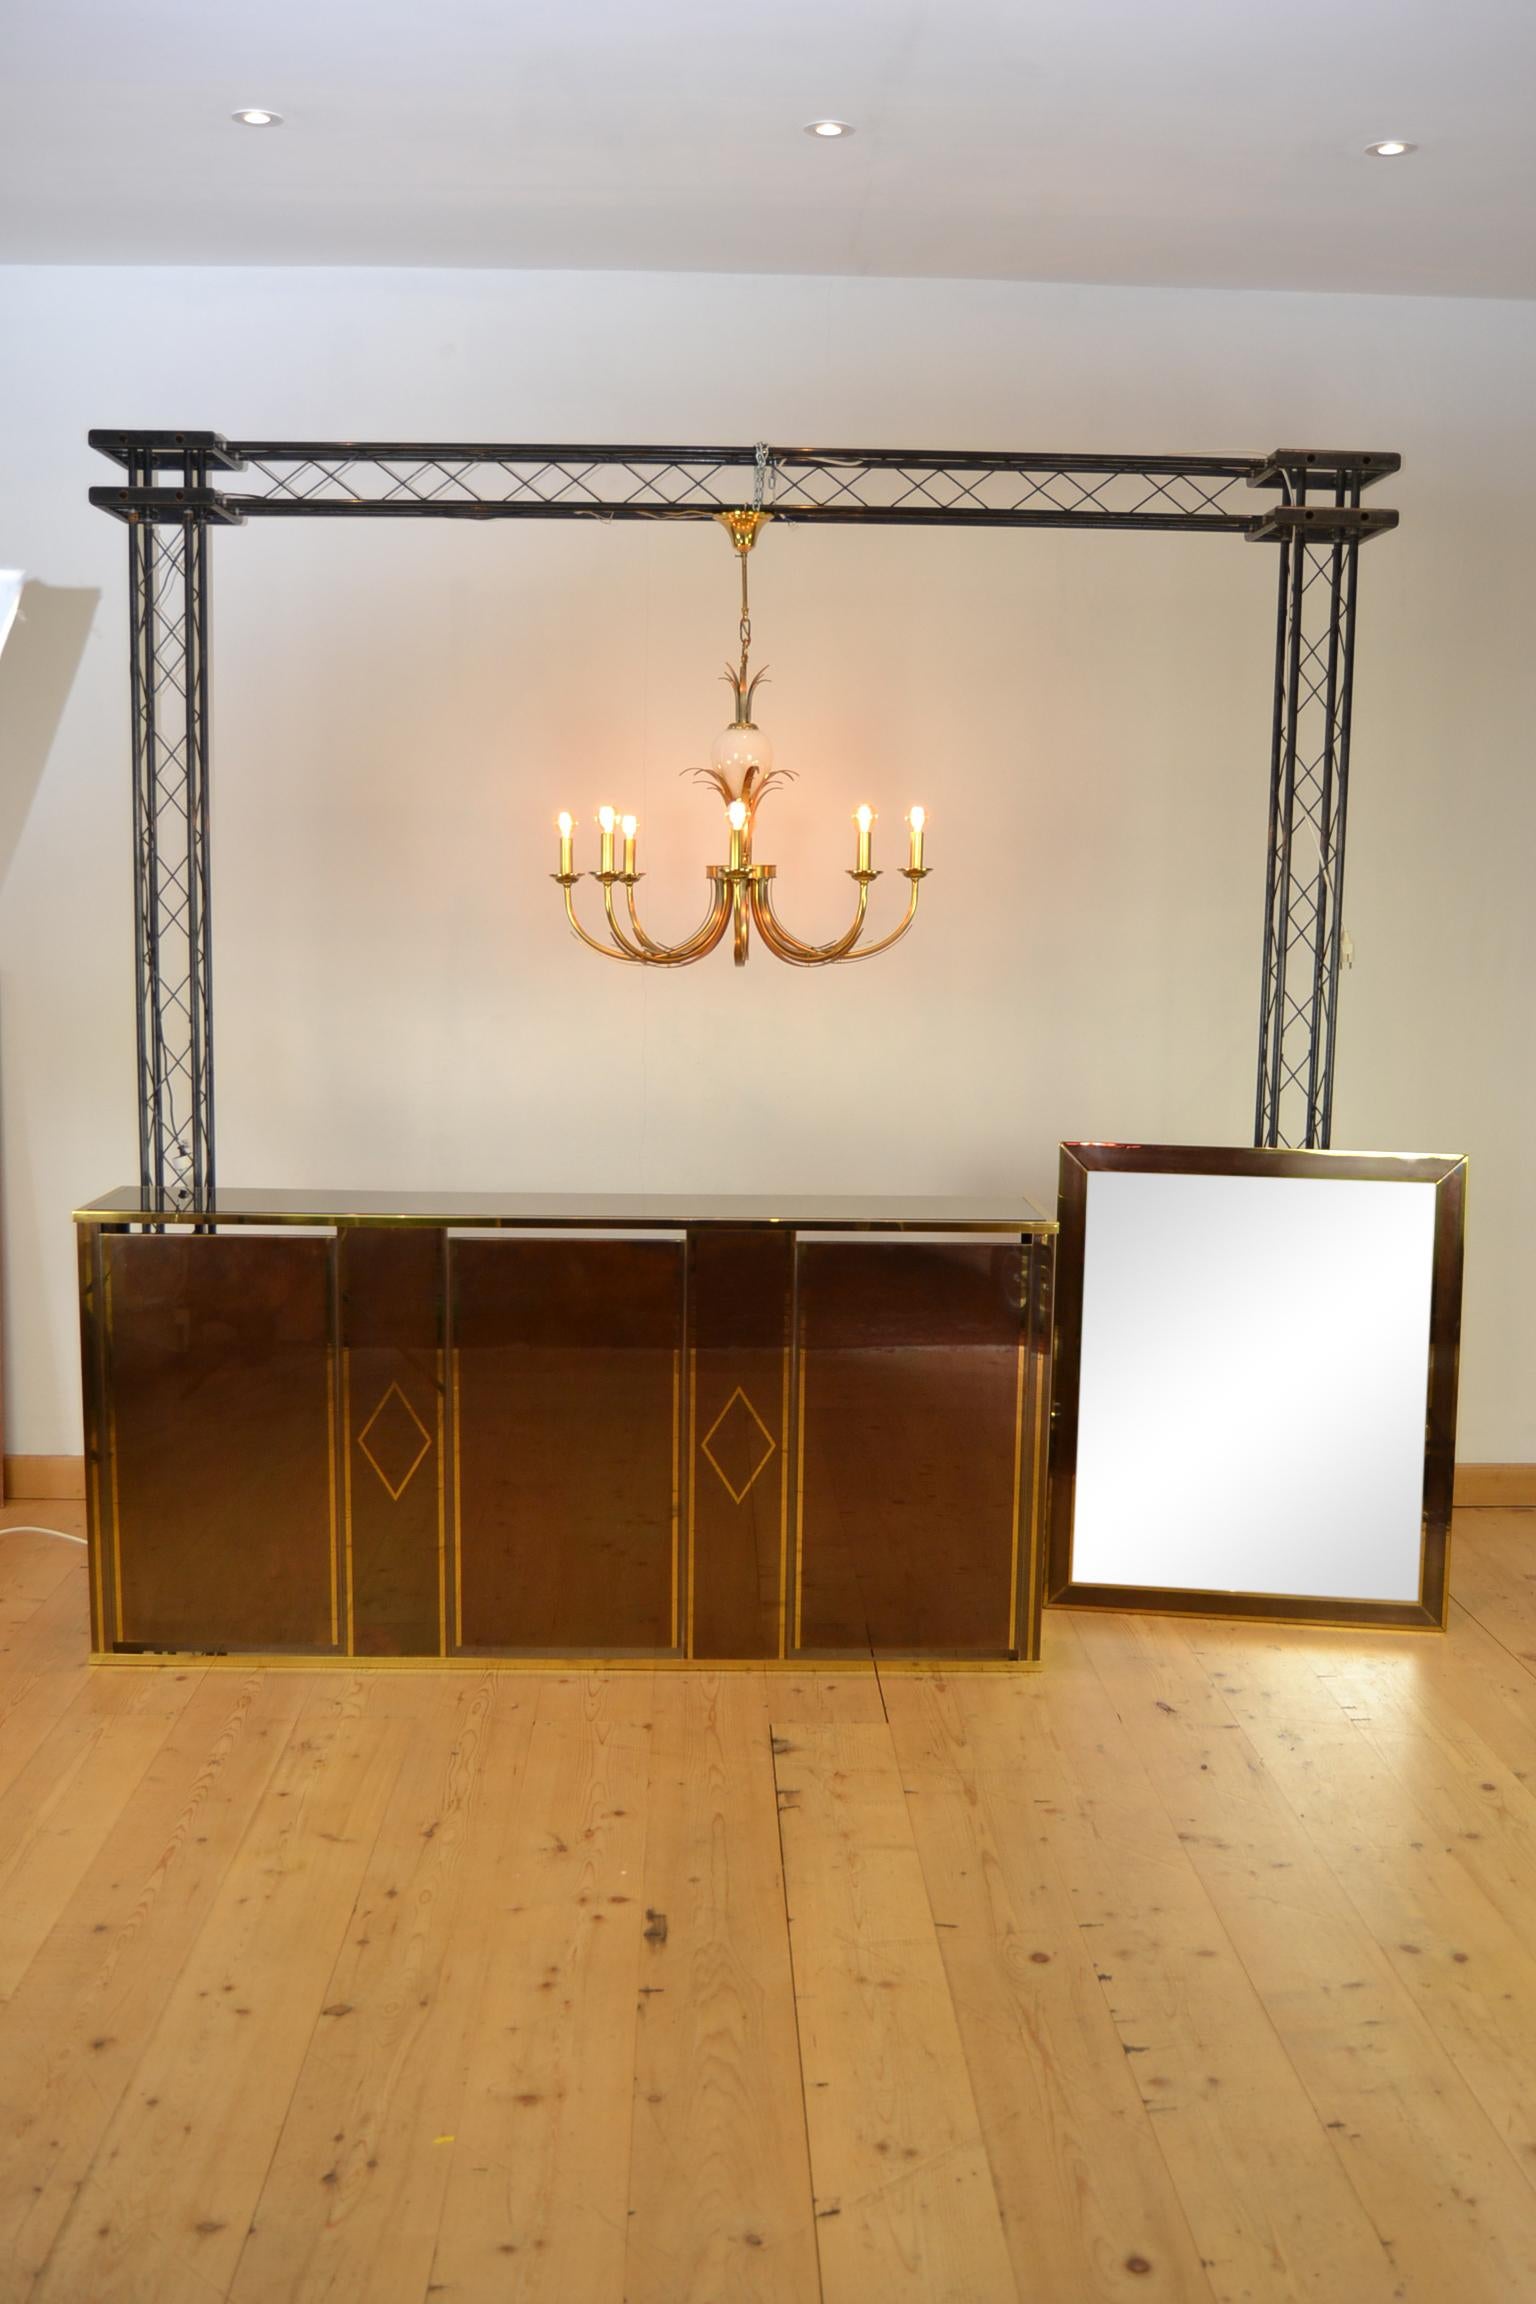 Hollywood Regency console table, dry bar, home bar or presentation table in the style of Belgo Chrome. This Stylish Piece of Furniture dates circa 1970s. 
It's made of brass or copper with a fume glass top.

Stylish wall table, console table. 

We